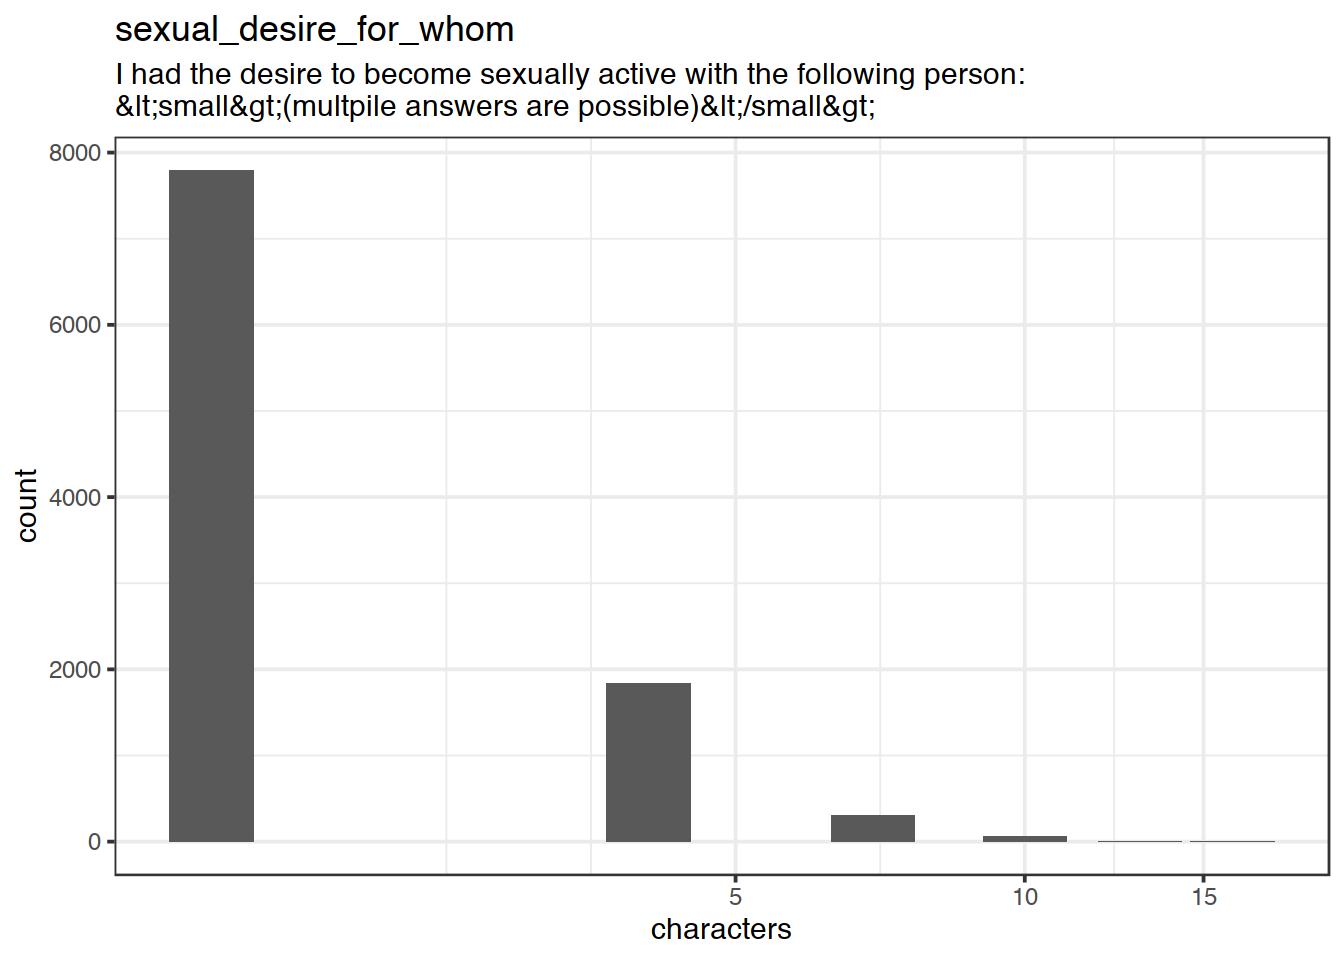 Distribution of values for sexual_desire_for_whom